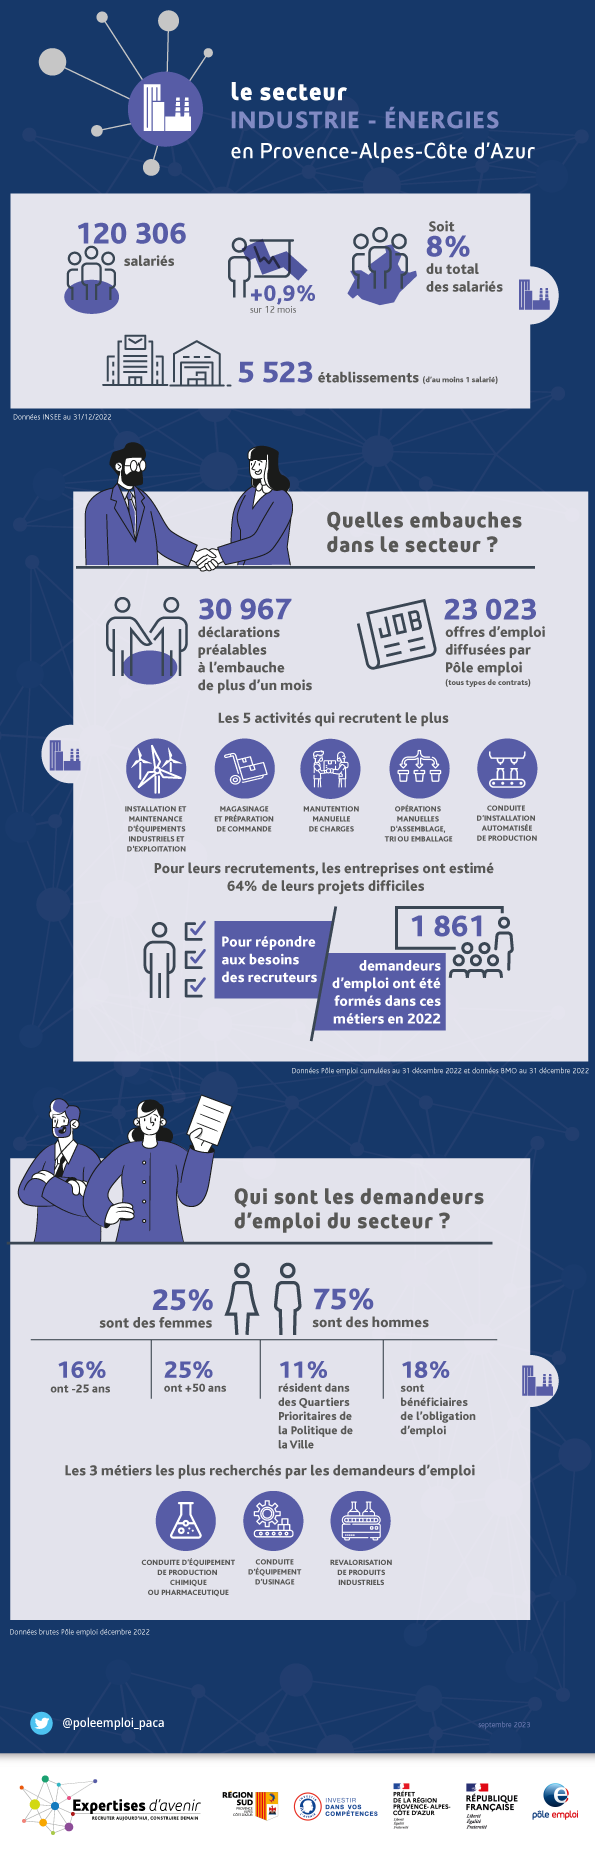 infographie-INDUSTRIE-ENERGIES_sept23.png